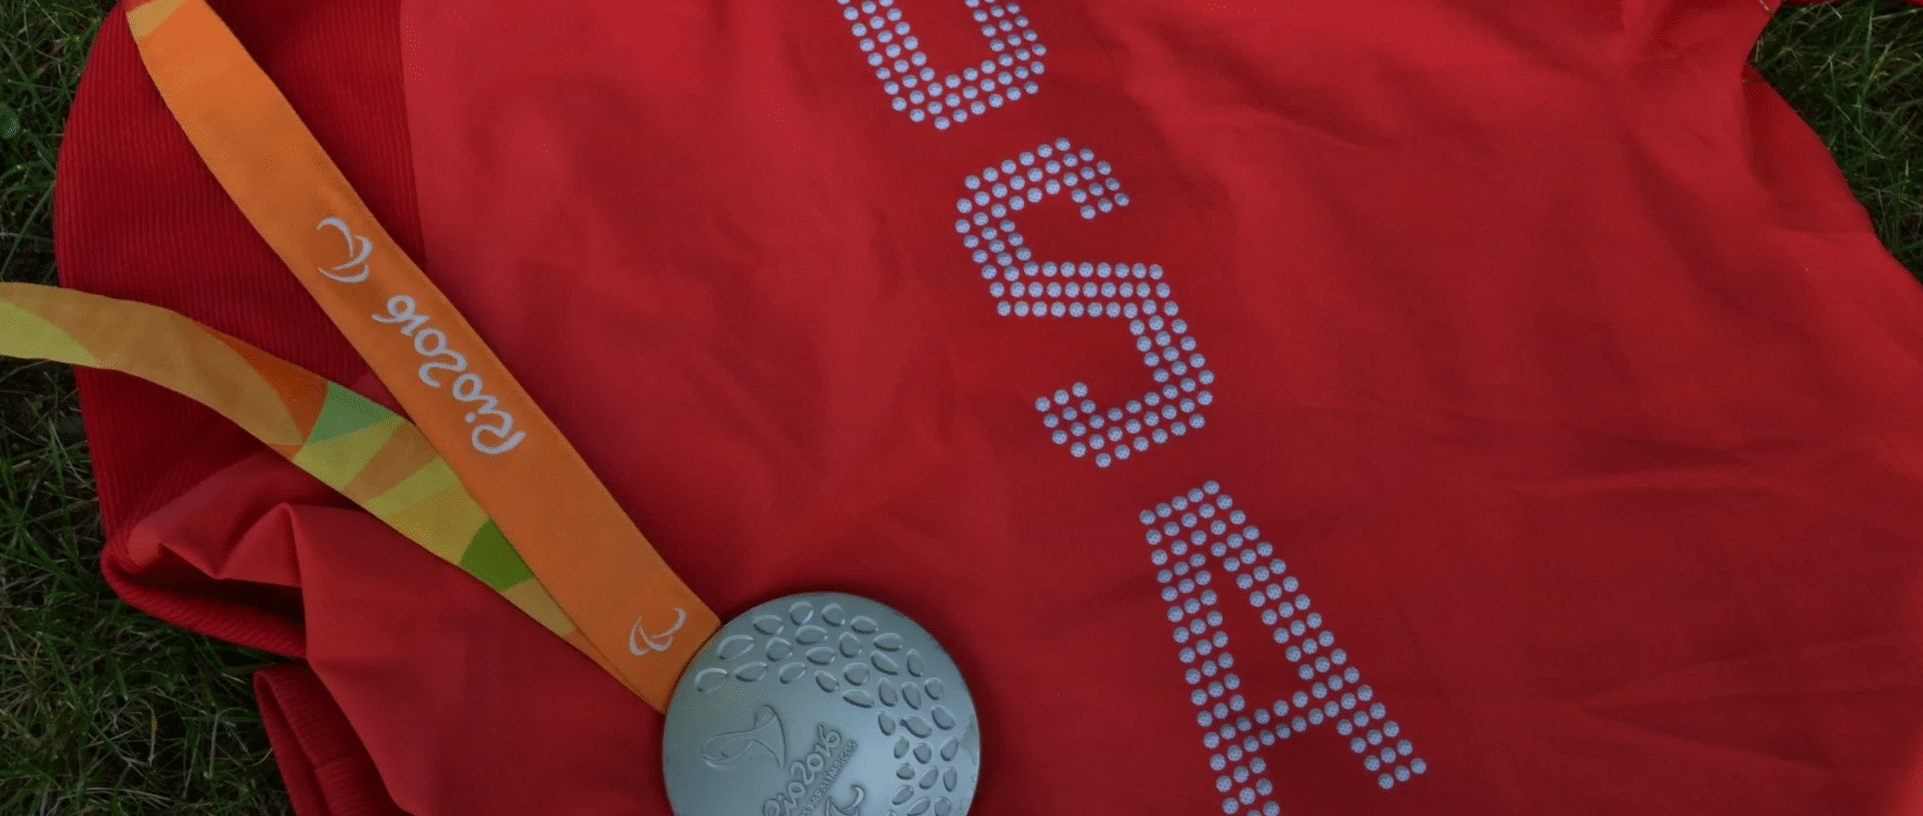 A red Team USA Wheelchair Rugby jersey with a silver medal from the 2016 Paralympic Games.